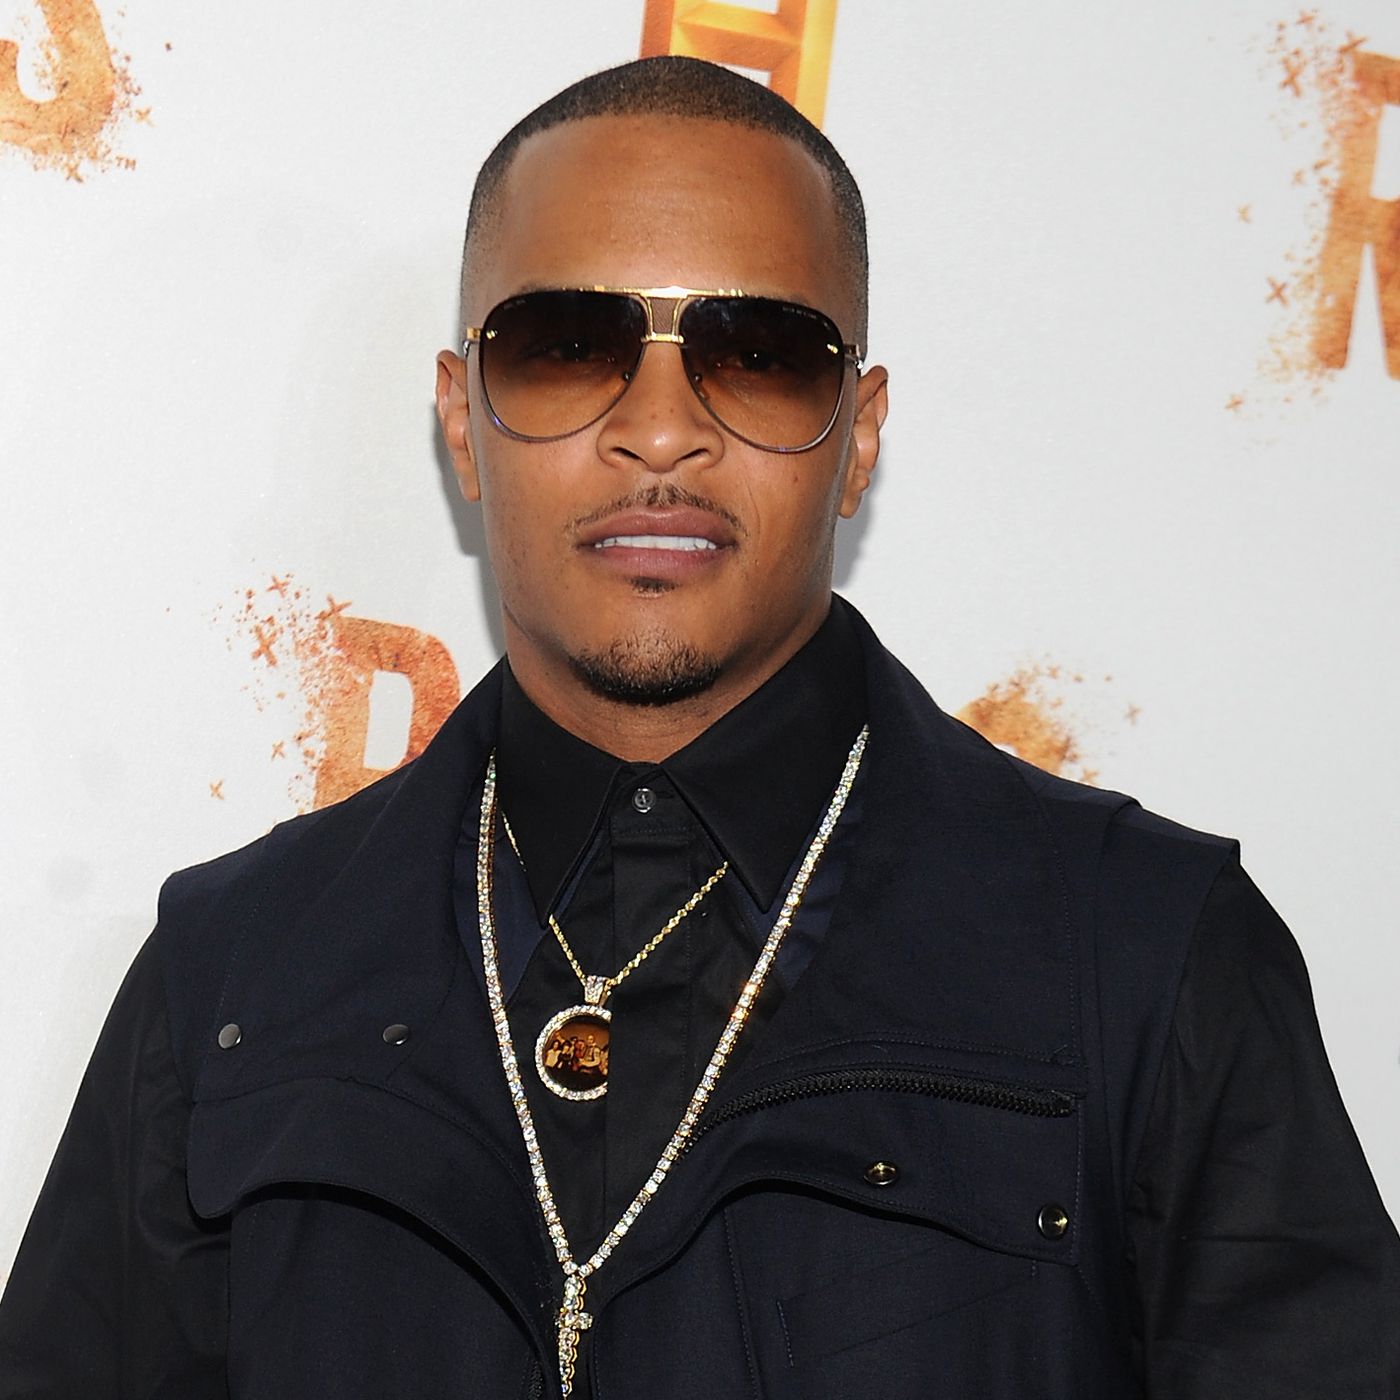 T.I. Comes After Comedian For Making Jokes About Sexual Abuse